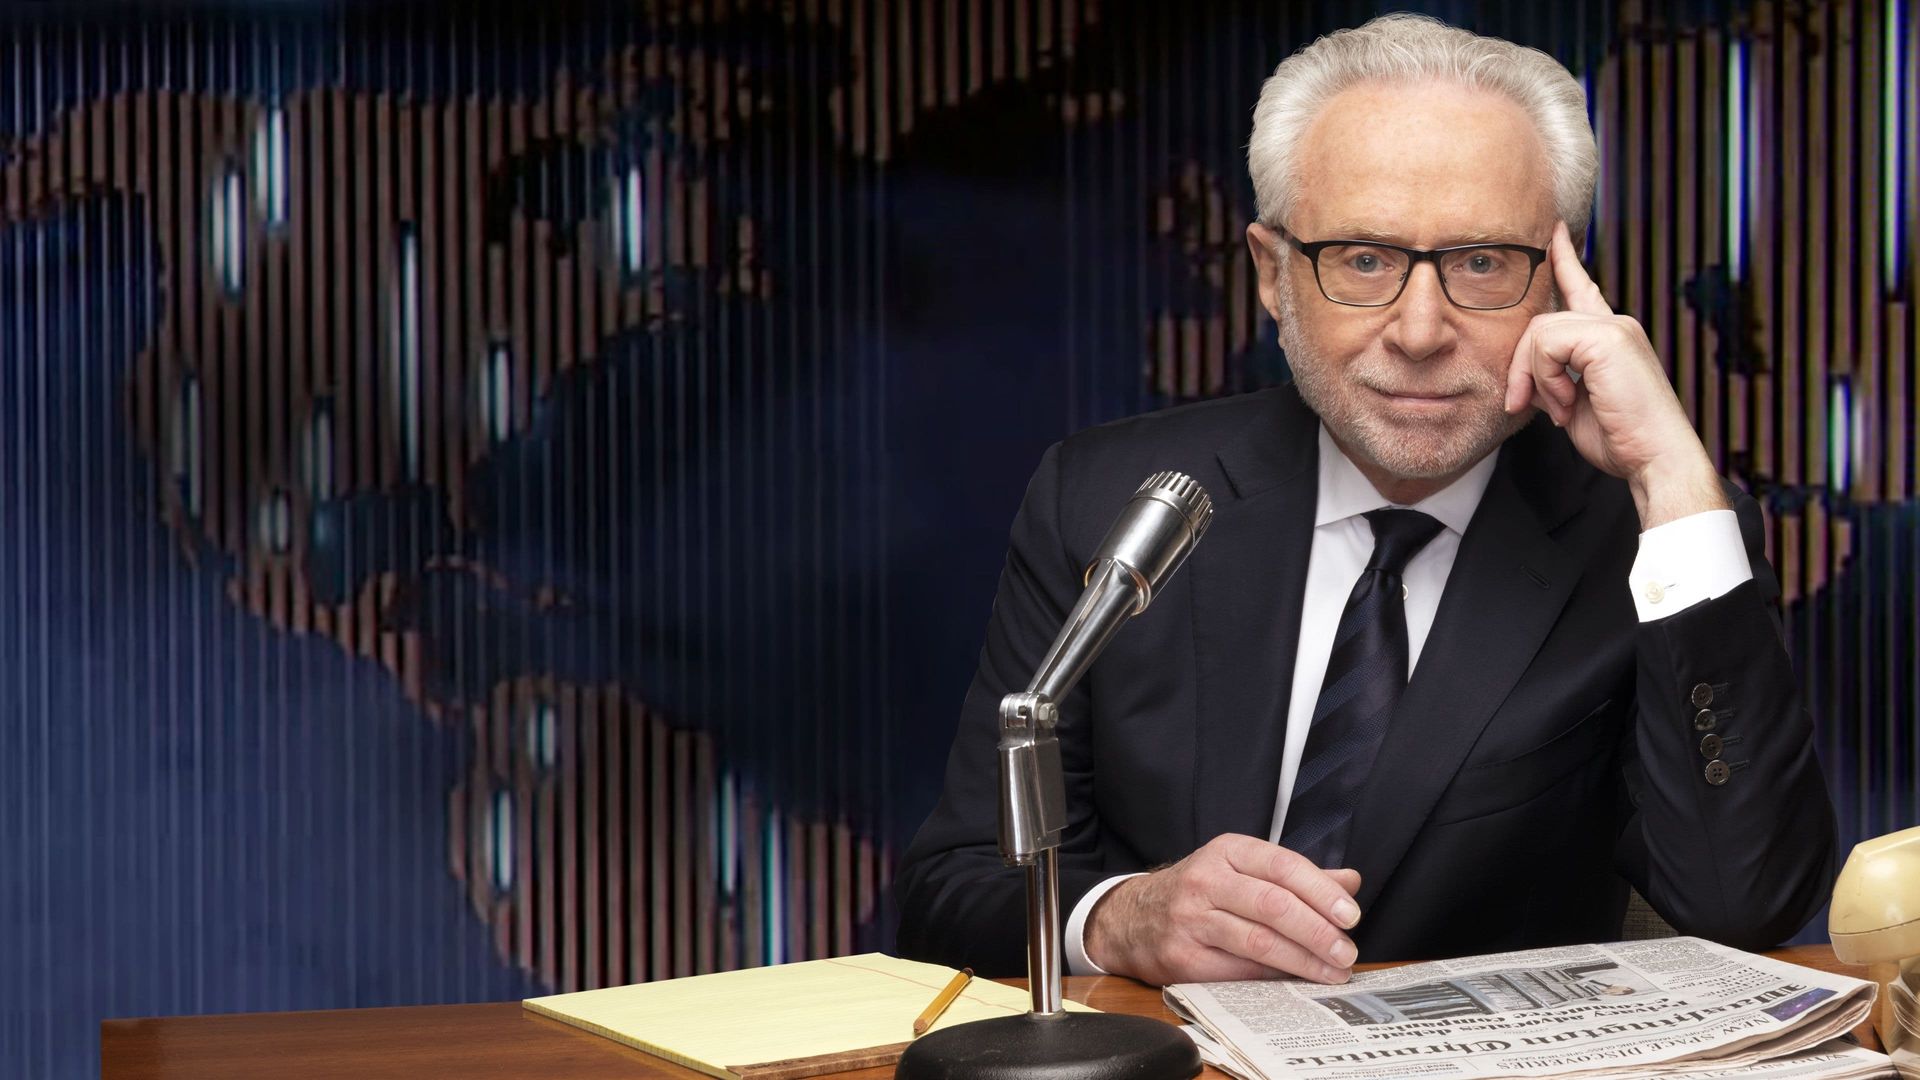 The Newscast with Wolf Blitzer background